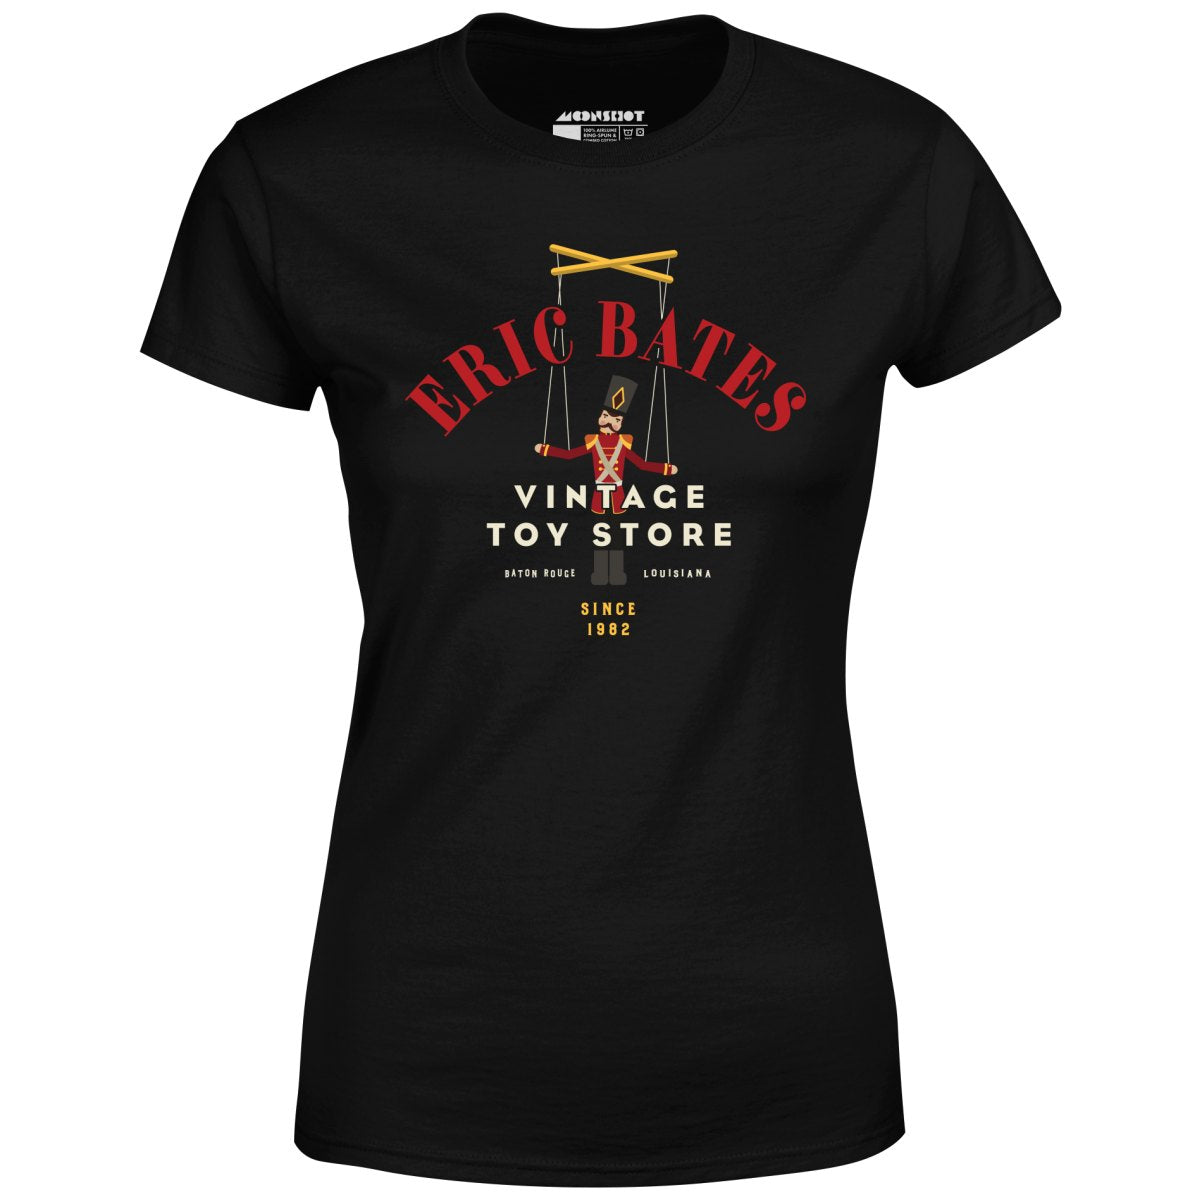 The Toy - Eric Bates Vintage Toy Store - Women's T-Shirt